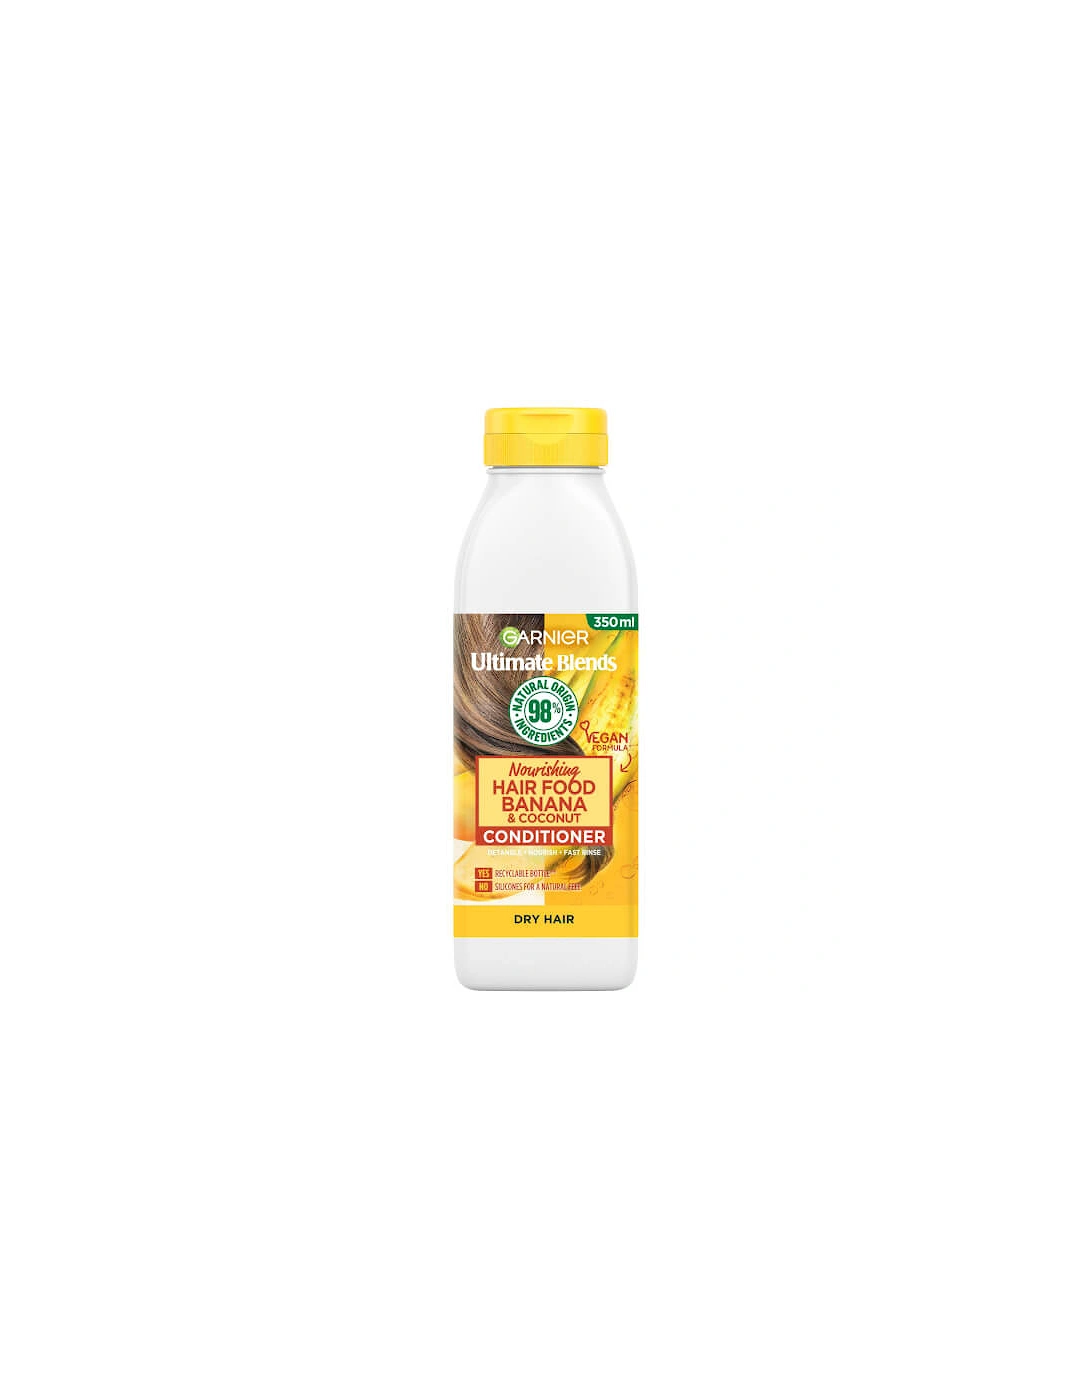 Ultimate Blends Nourishing Hair Food Banana Conditioner For Dry Hair 350ml, 2 of 1